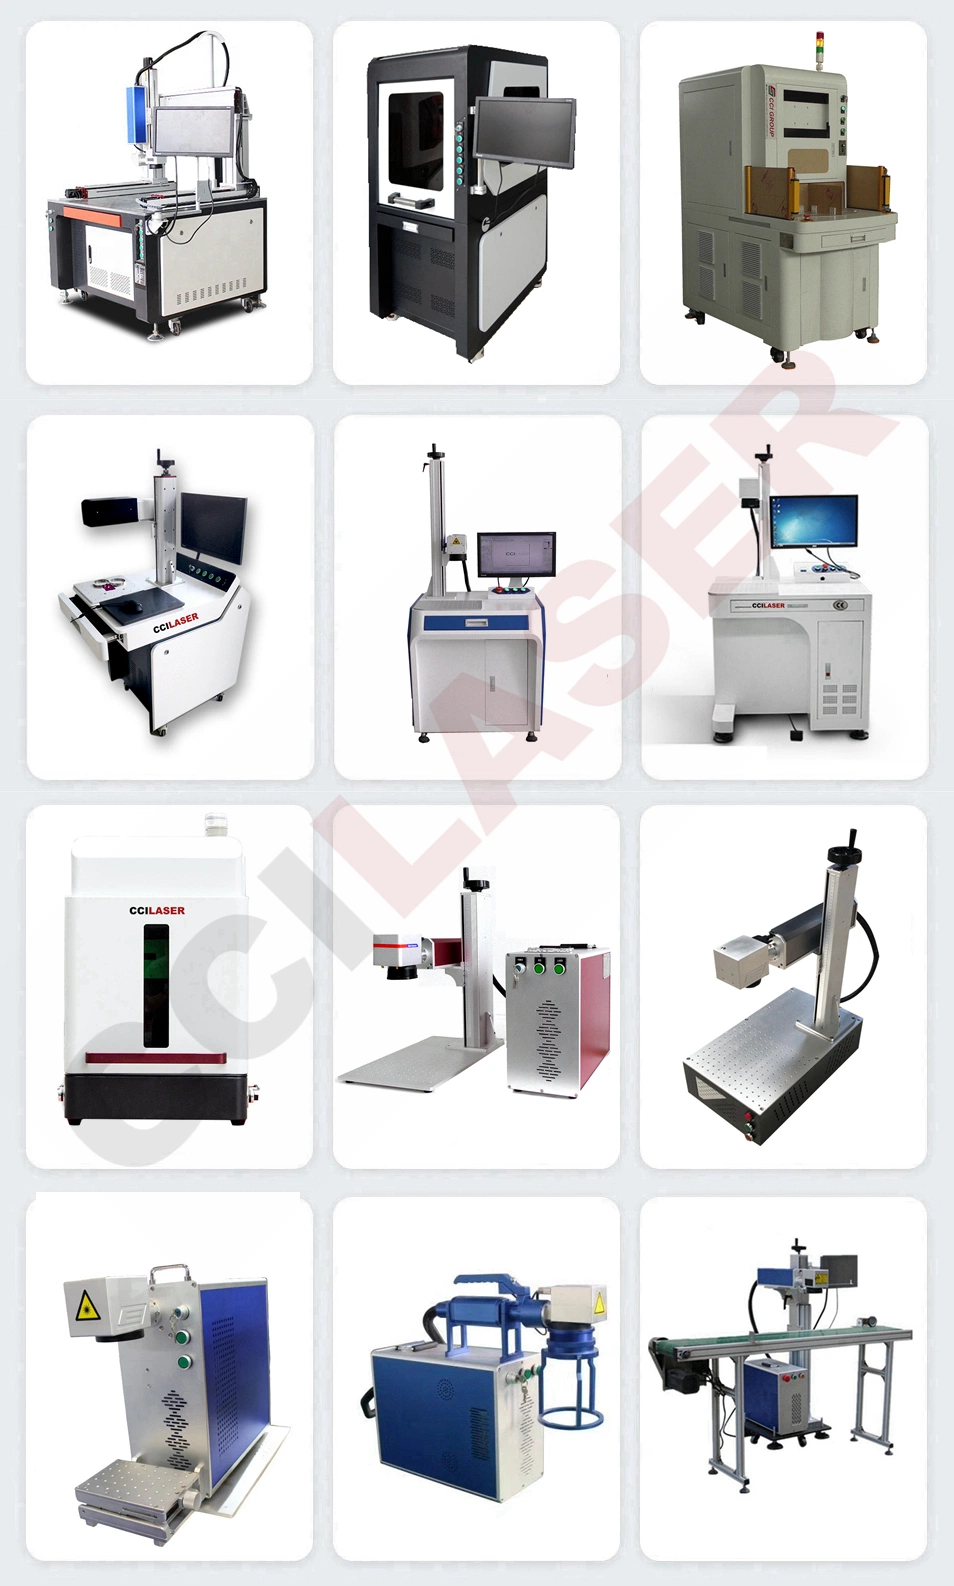 Automatic Position Online Printing Coding Flying Type UV Fiber Laser Marking Machine for Logo Series Number Code Date PP PE Metal Plastic Wood Glass